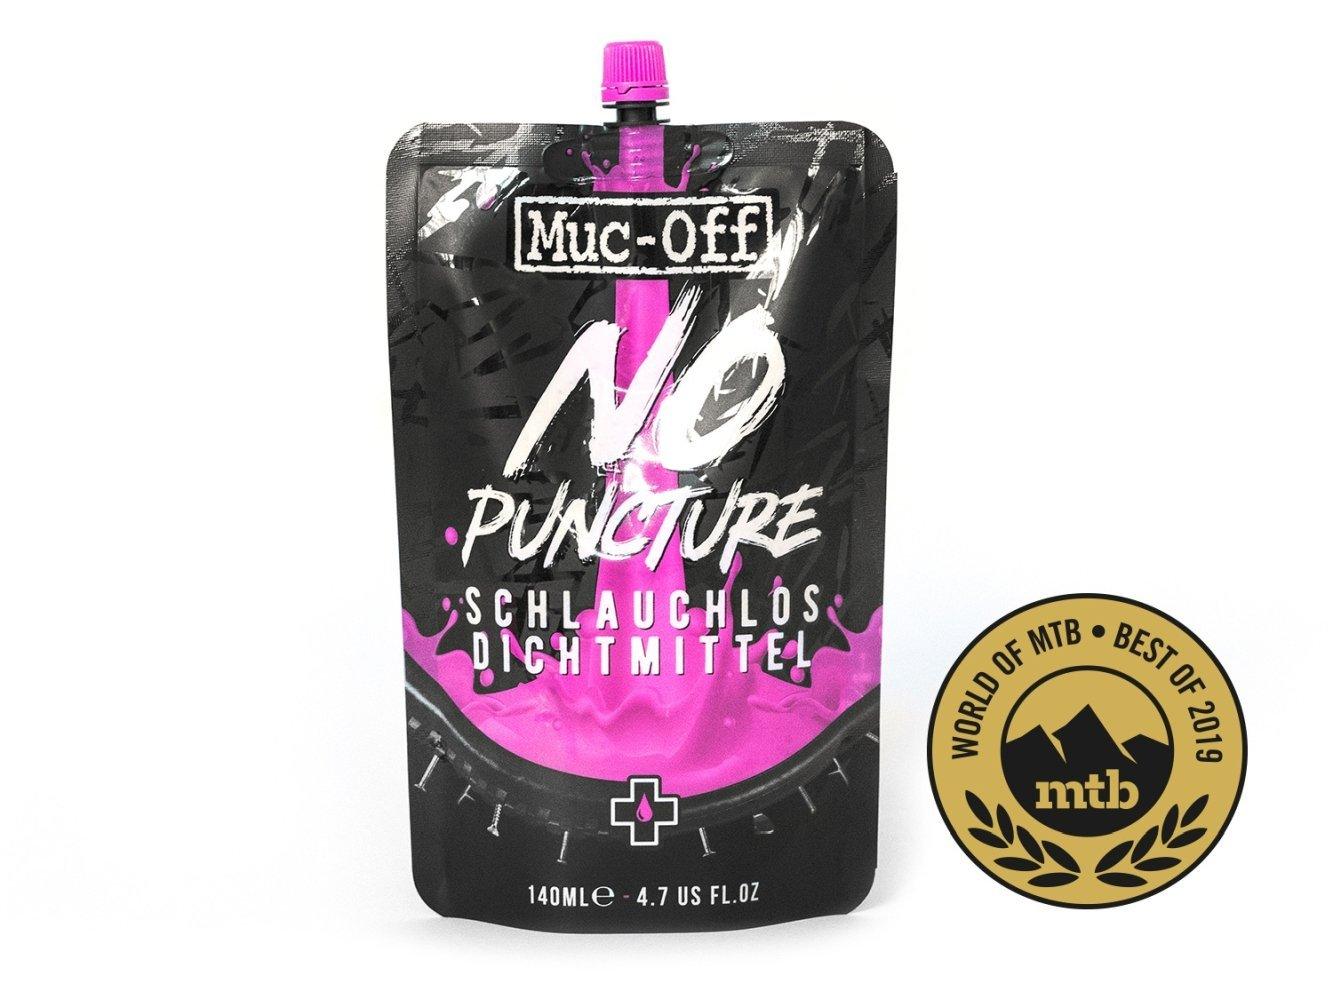 Muc Off No Puncture Hassle 140ml Pouch Only - Liquid-Life